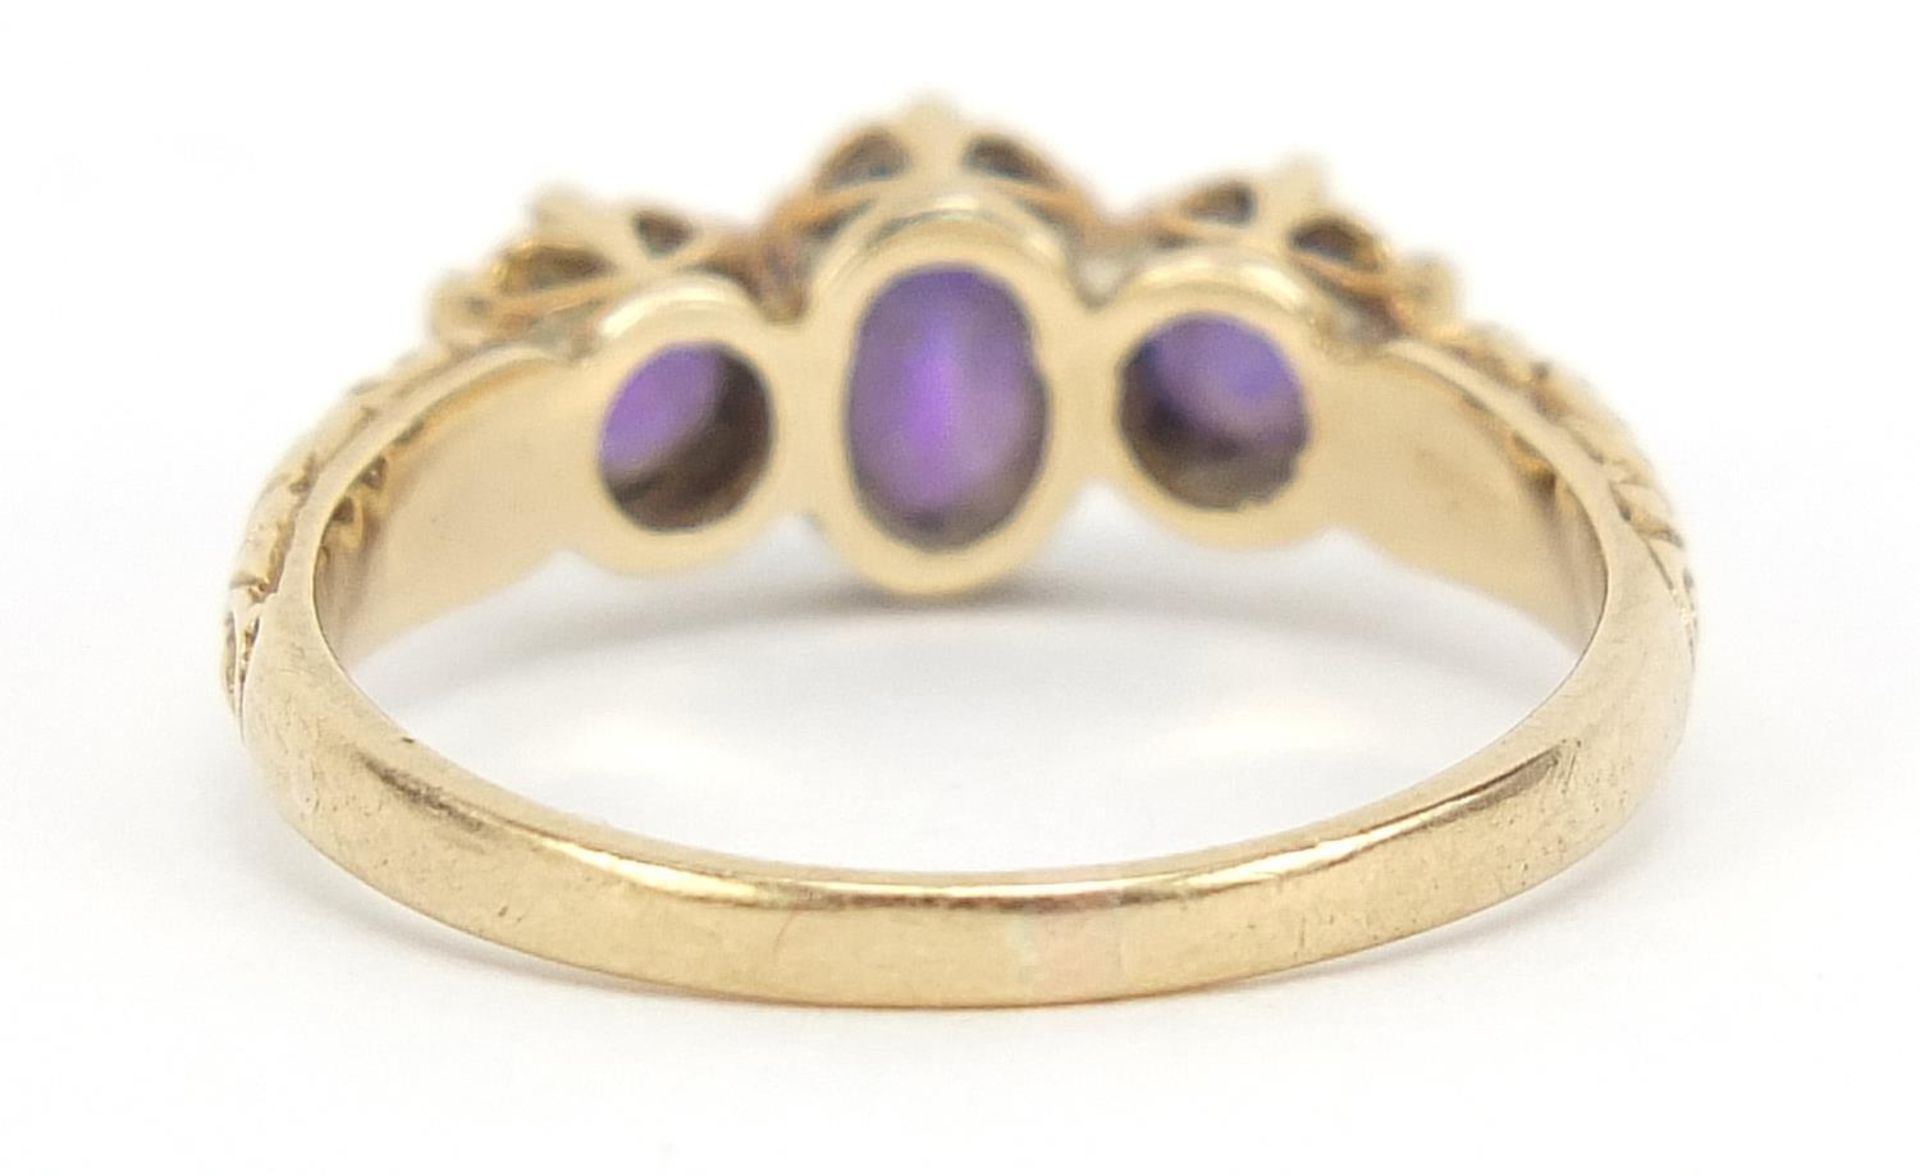 Antique design 9ct gold purple stone ring with ornate setting, size M, 2.3g : - Image 3 of 4